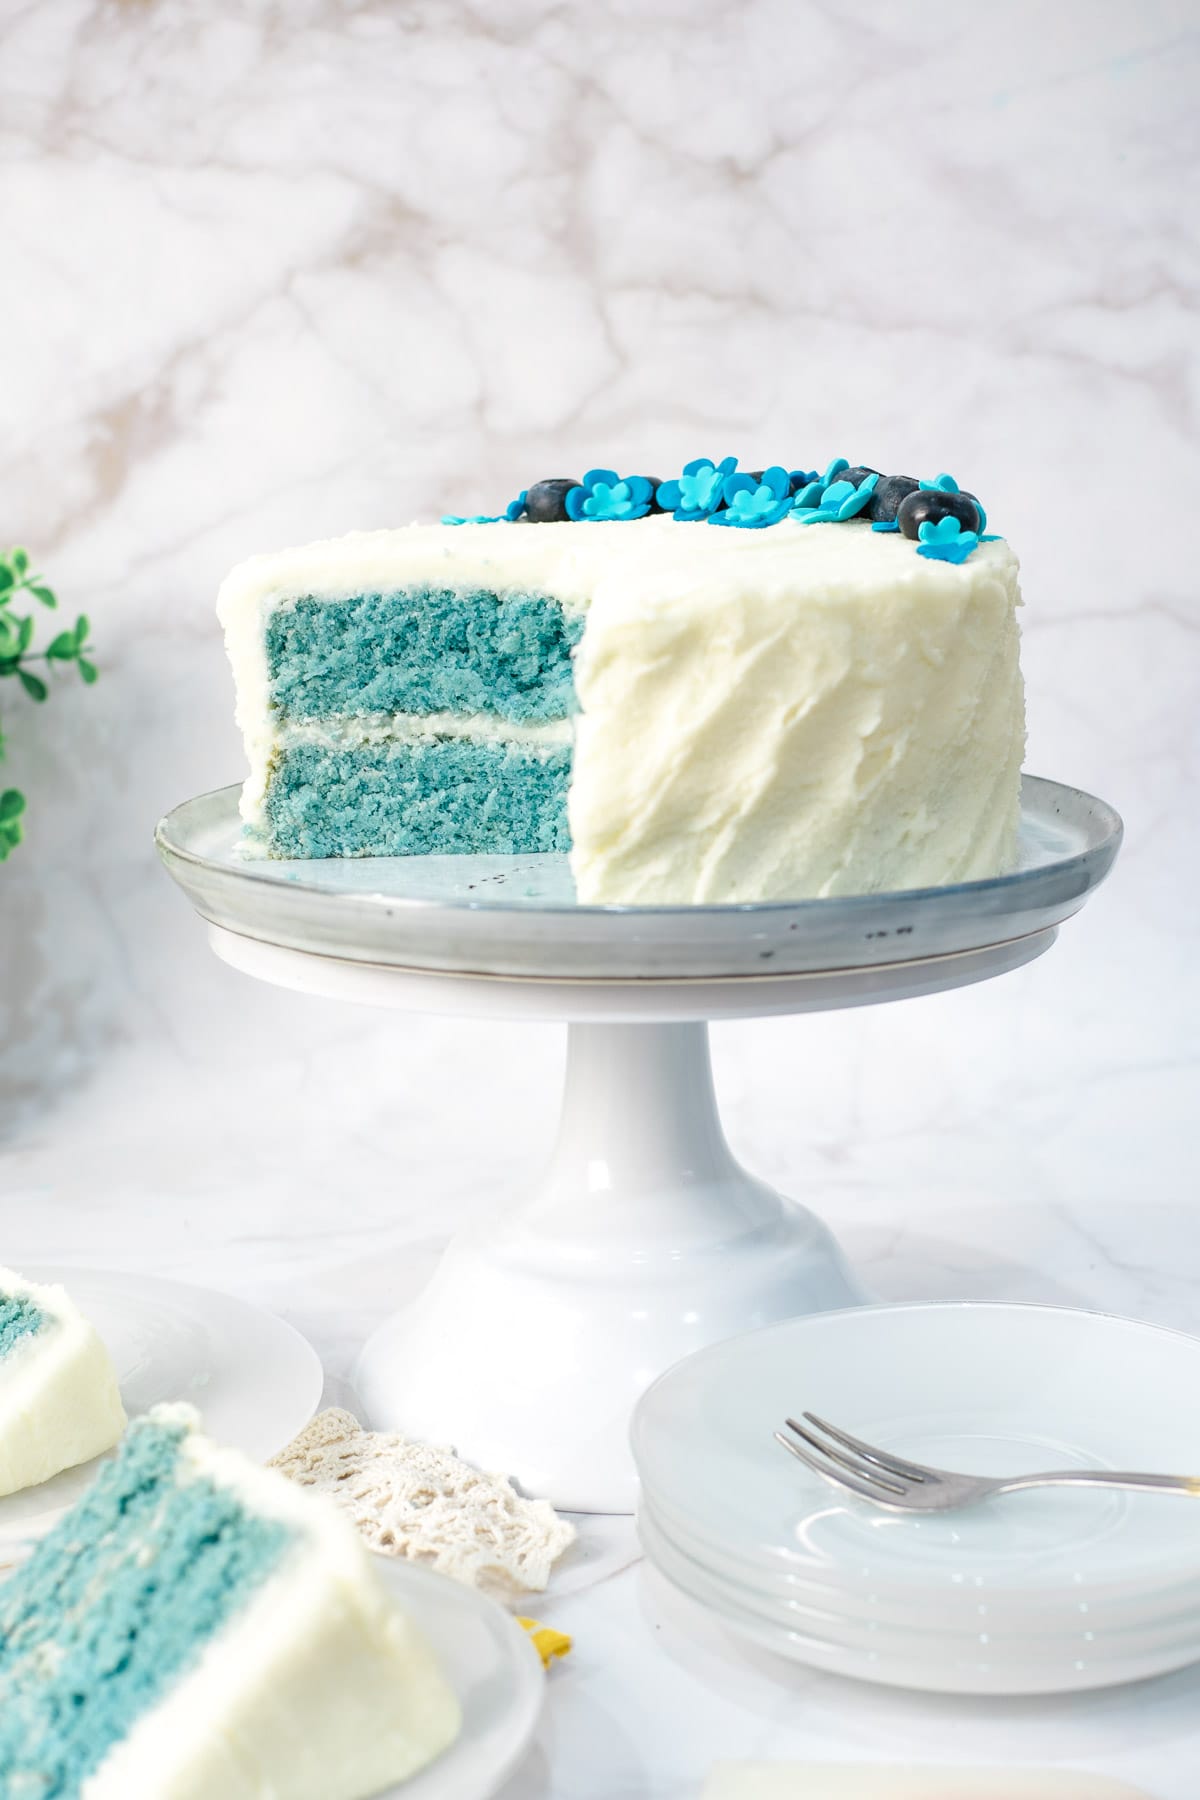 A blue cake with white frosting on a white cake stand, with a few slices cut out onto white plates.